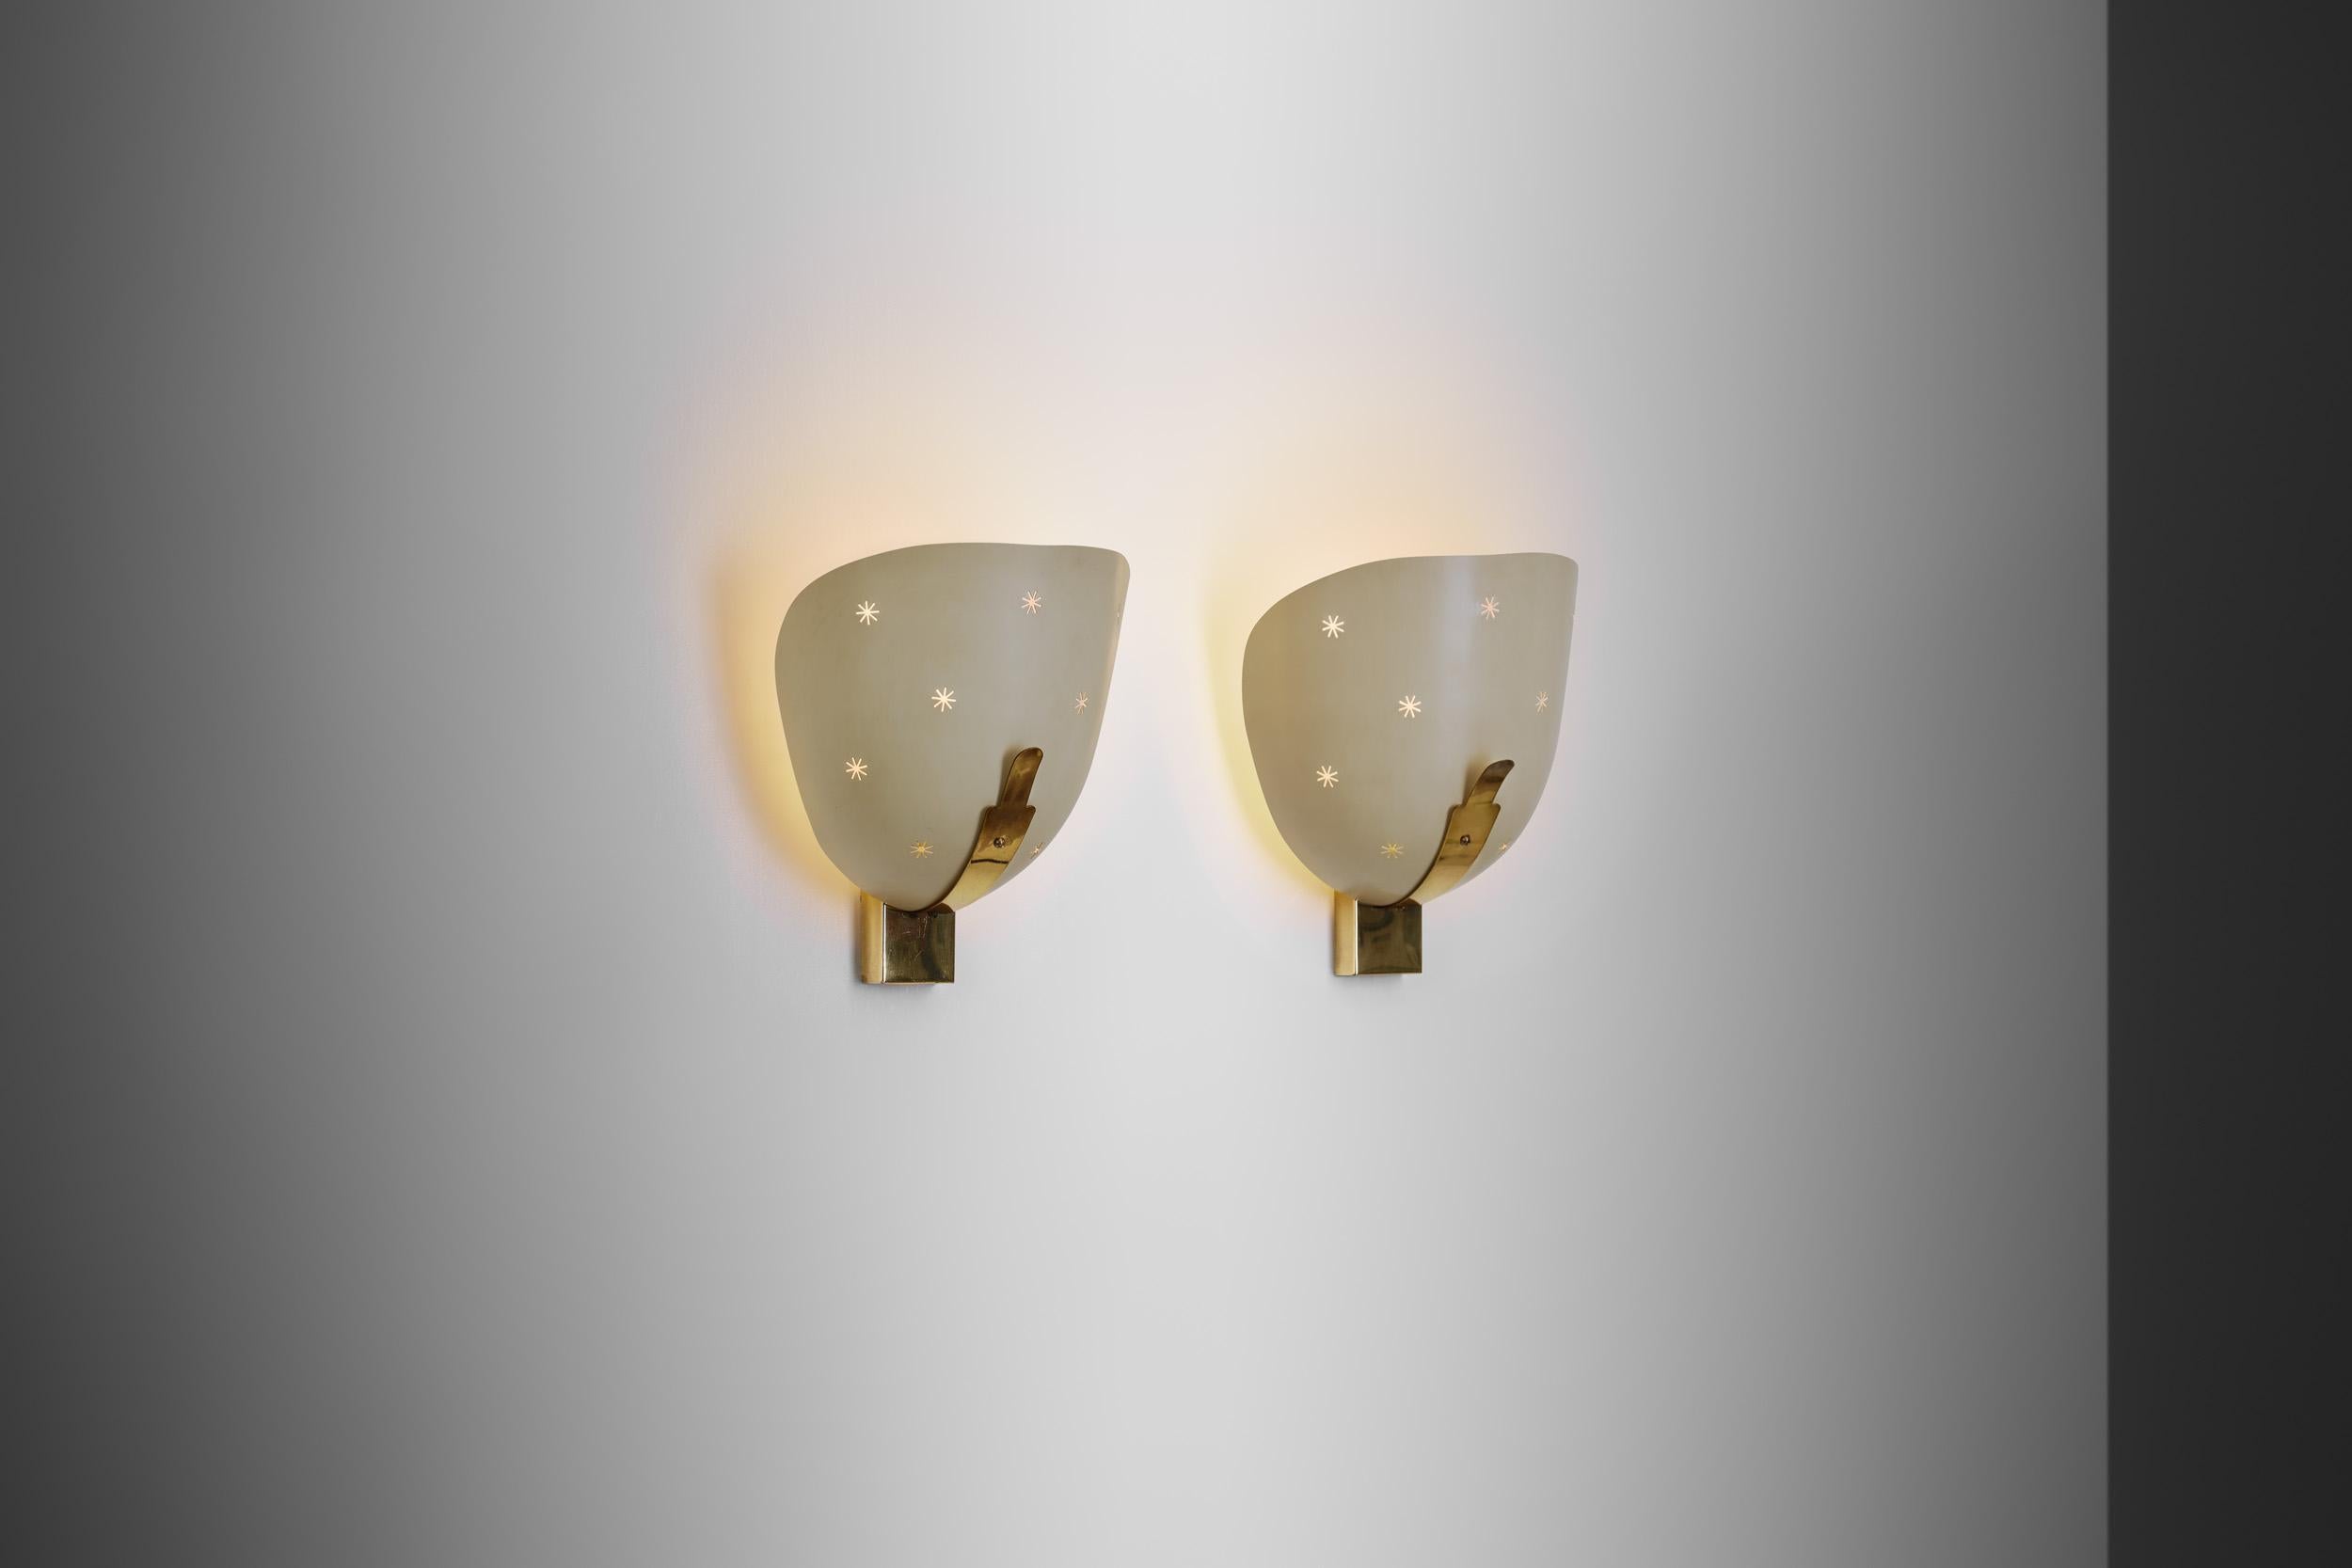 These early 1950s wall sconces show the lesser seen whimsical side of mid-century design. While having some of the main design elements European mid-century lighting design is known for, these lamps are entirely unique, with a charming look that